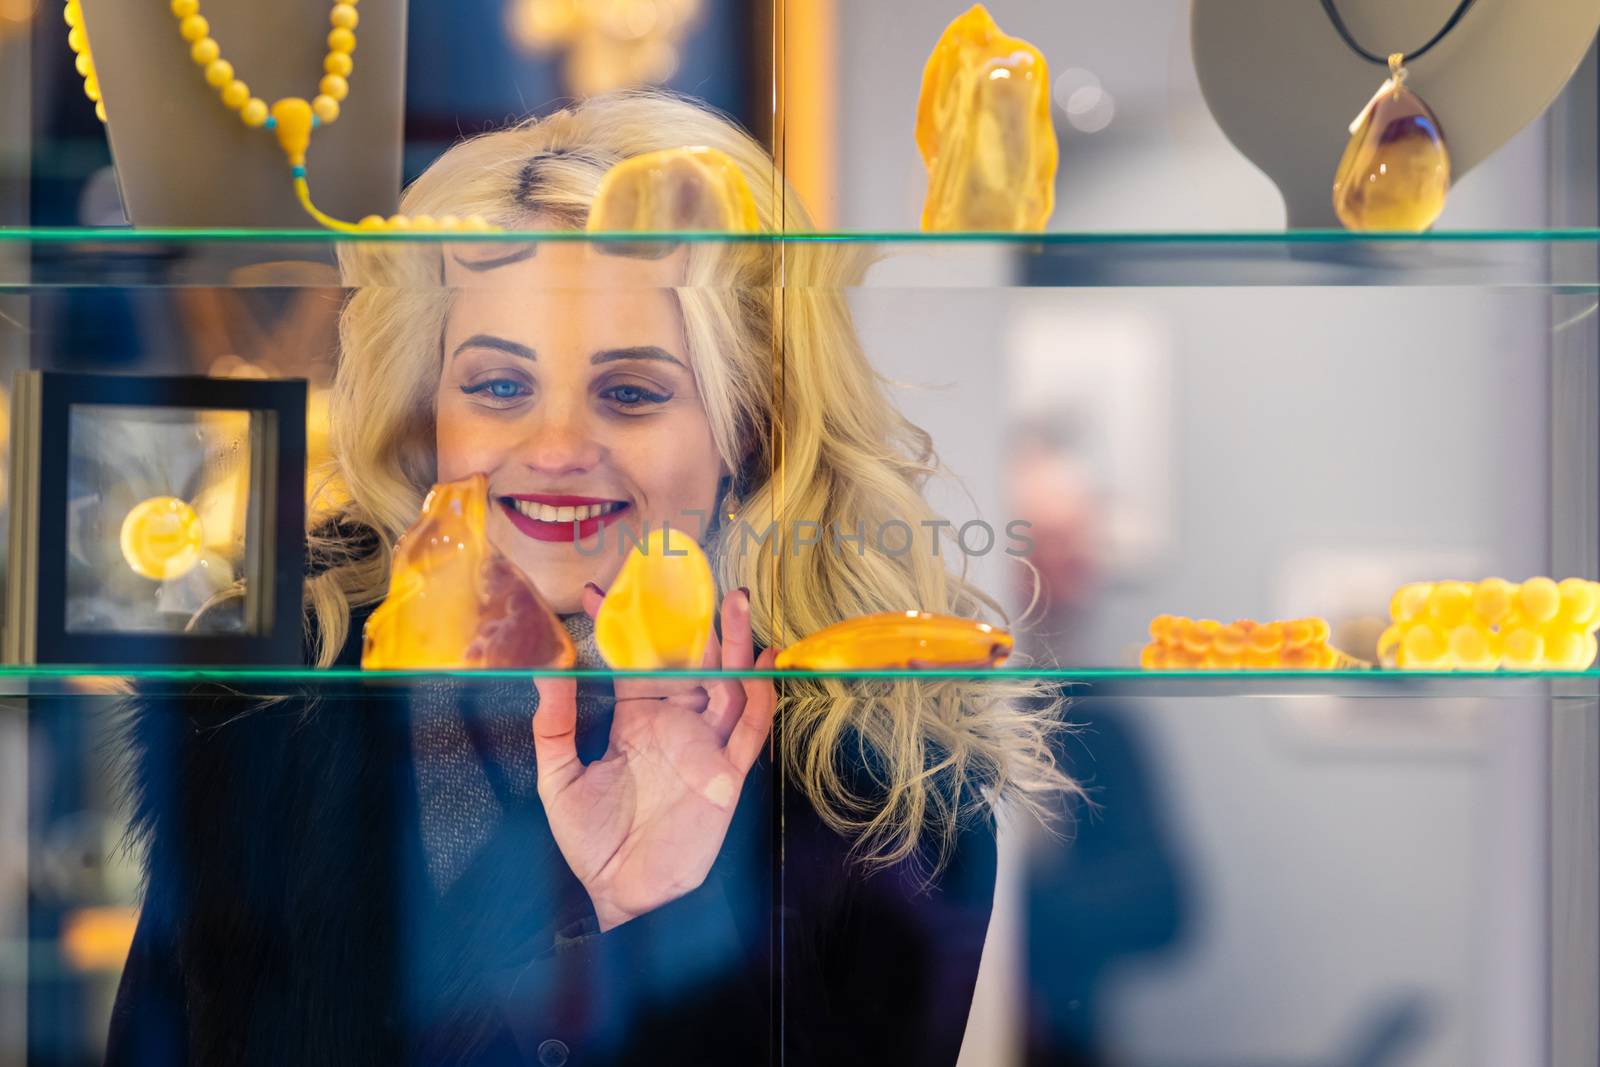 A young, beautiful, blonde woman looks at amber jewelry at a jewelry store. View through the window from the street side - image